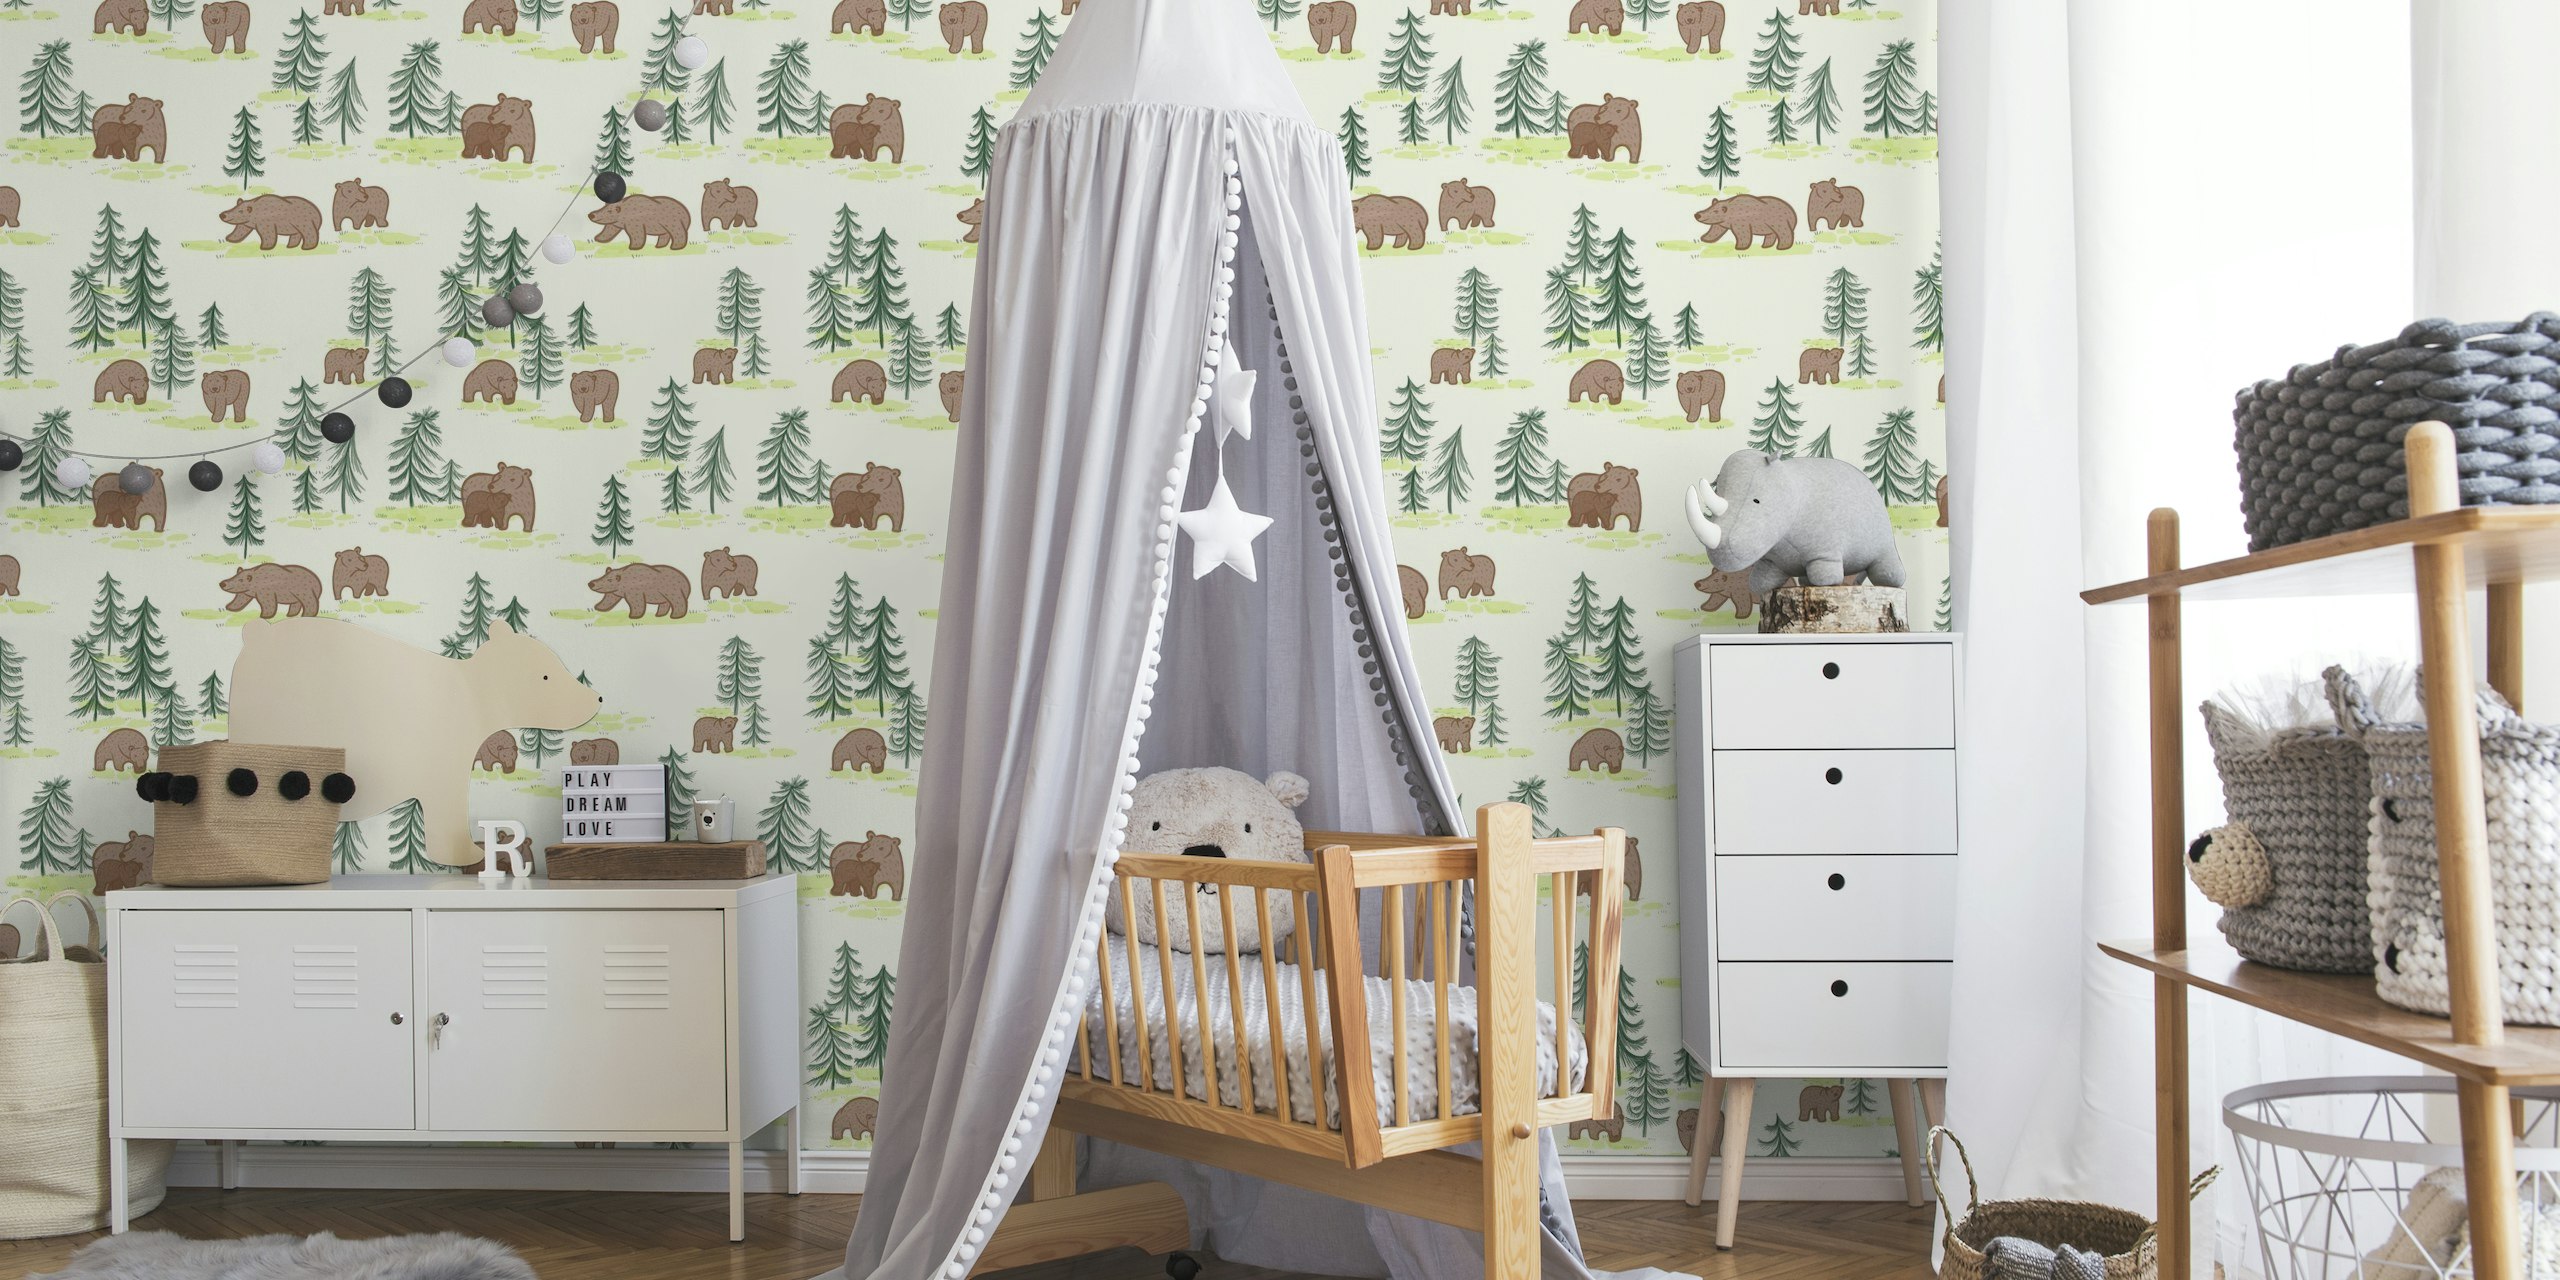 Illustrated bears and pine trees wall mural for a serene home decor